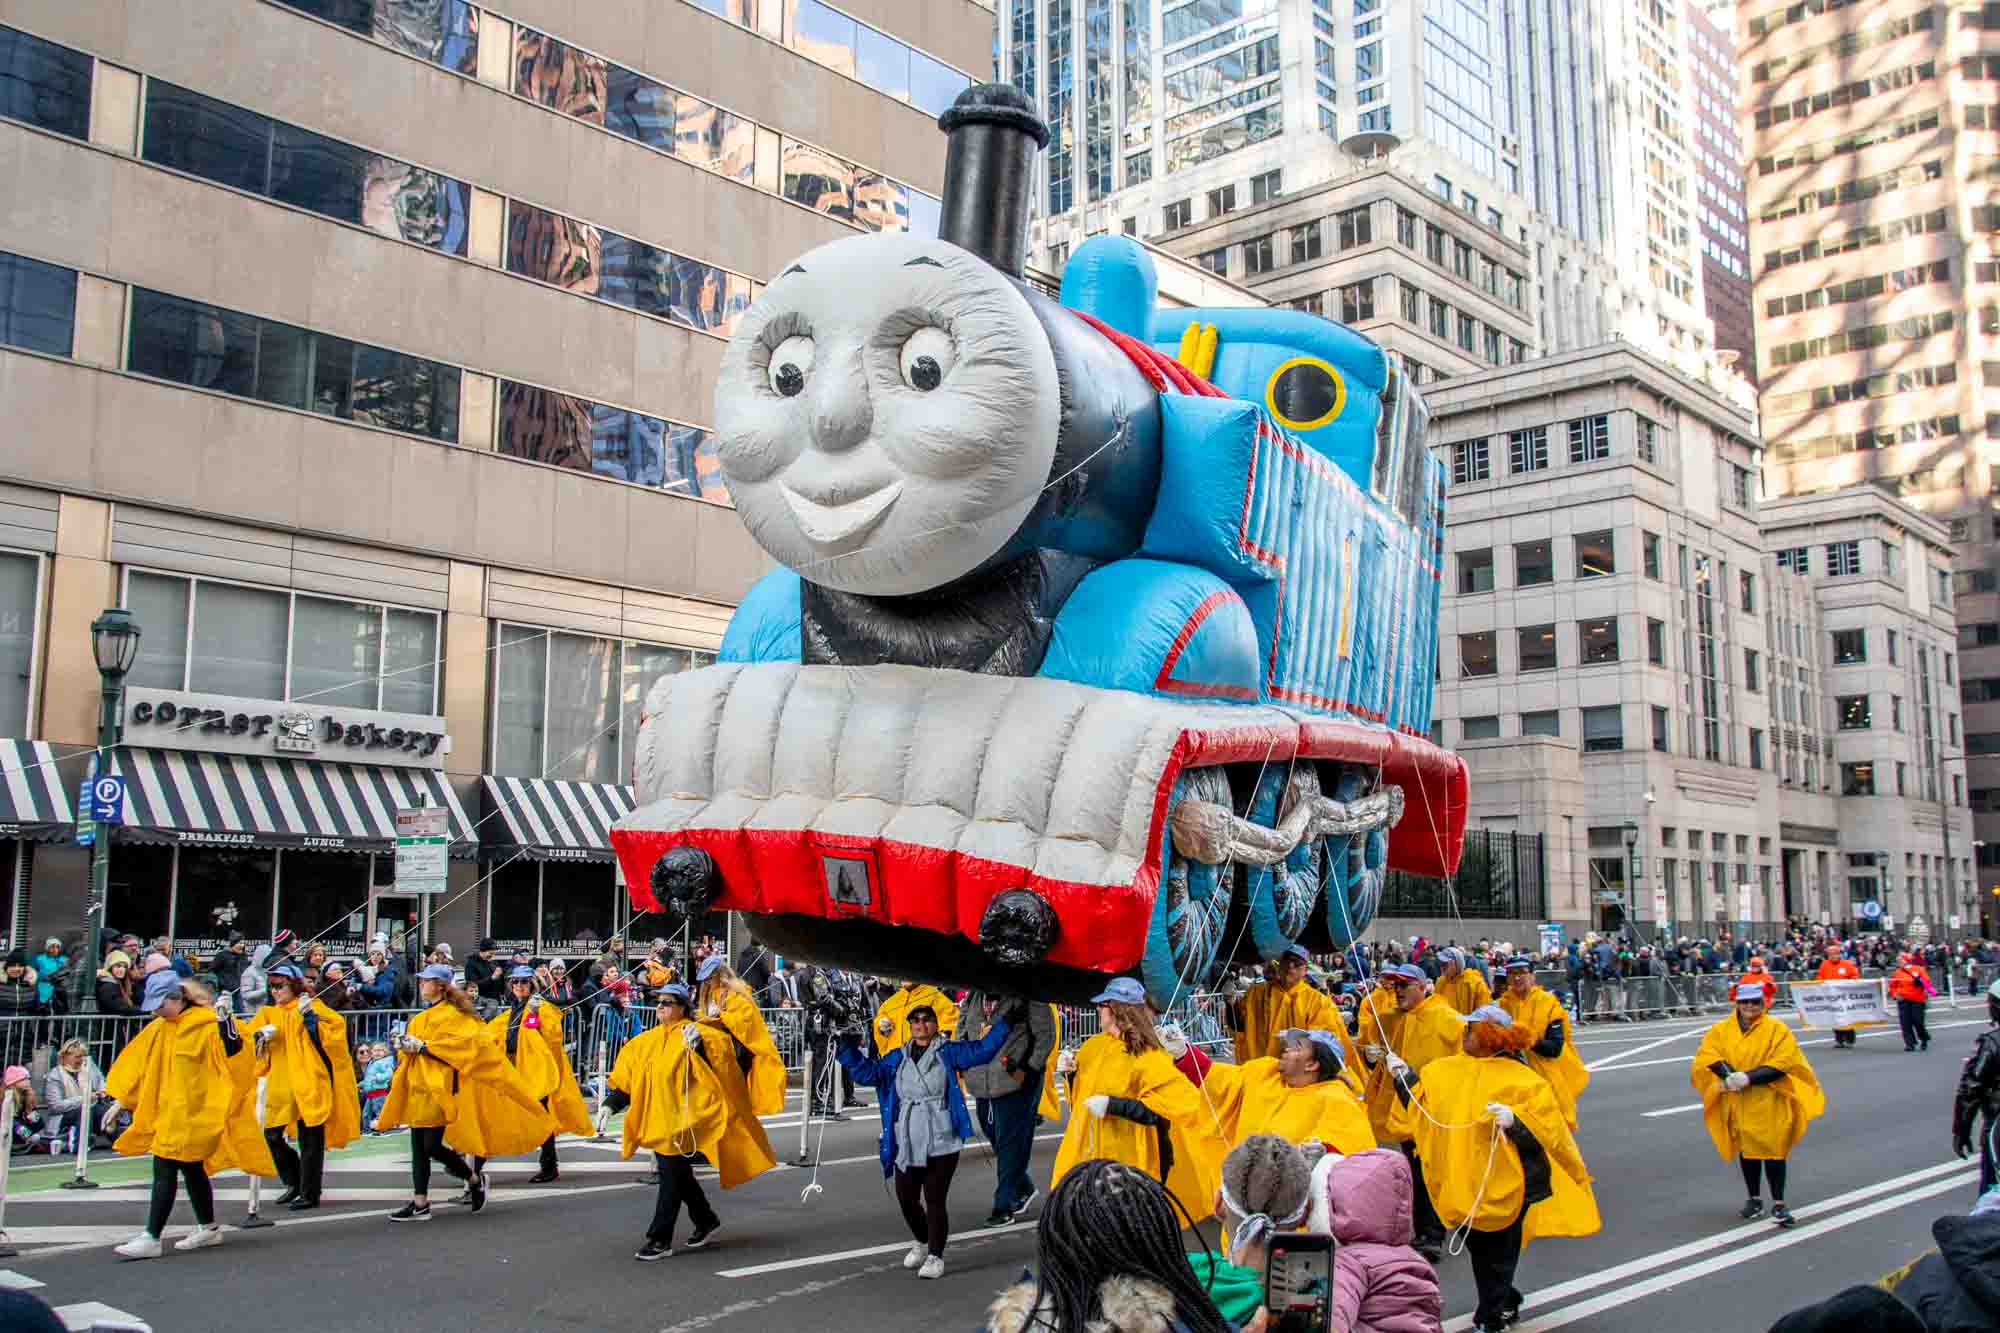 Inflatable balloon of Thomas the Tank Engine in parade